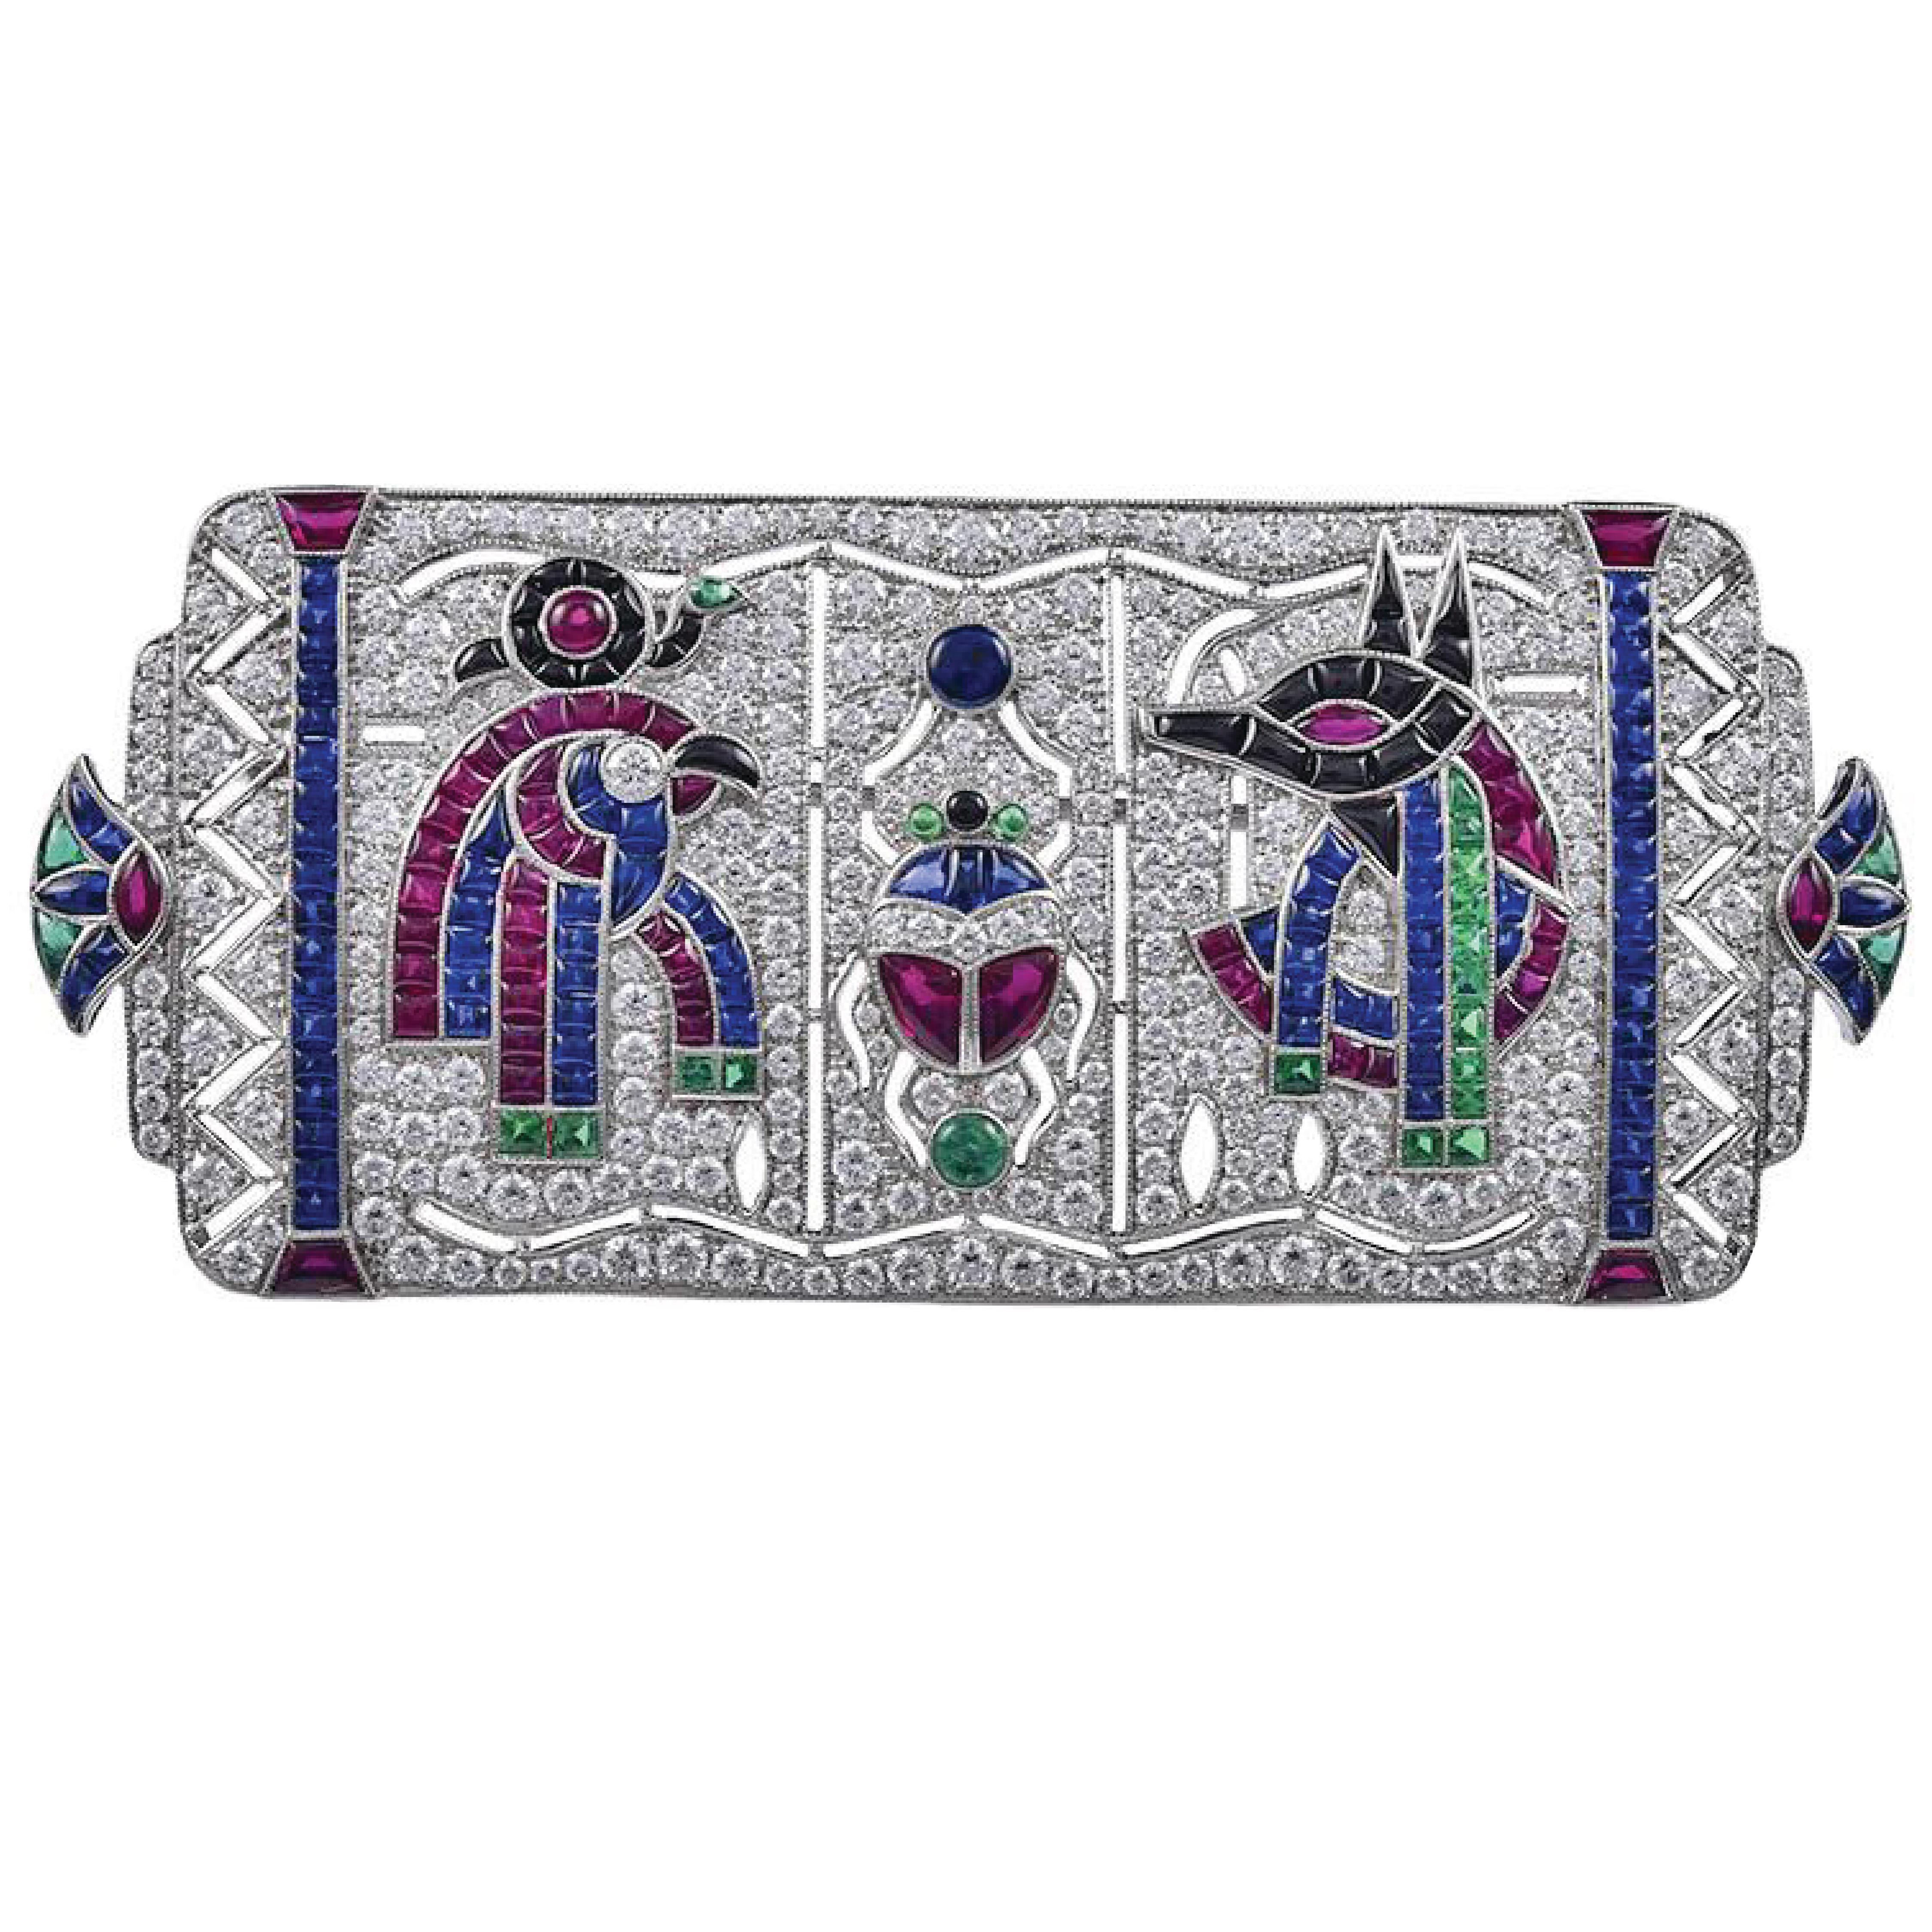 3.49 Carat Art Deco Inspired Egyptian Revival Platinum Brooch with Sapphire, Emerald, Ruby, and Diamonds. 
Total carat weight: 
Sapphires 5.03 carats
Emeralds 1.06 carats
Rubies 3.96 carats 
Diamonds 3.49 carats.